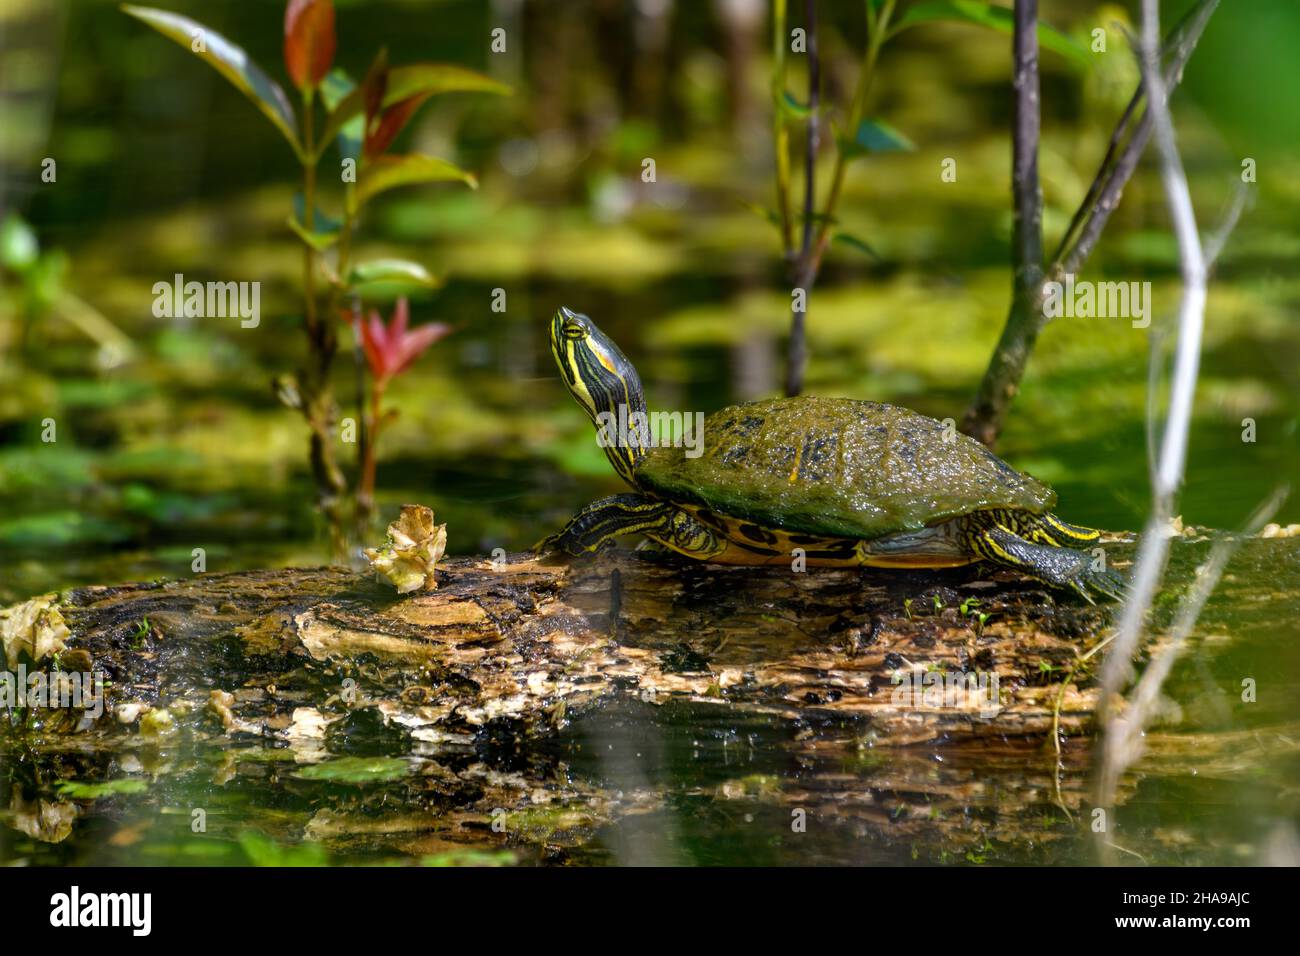 Red-eared slider (Trachemys scripta elegans), sunbathing on a log in a natural pond Stock Photo